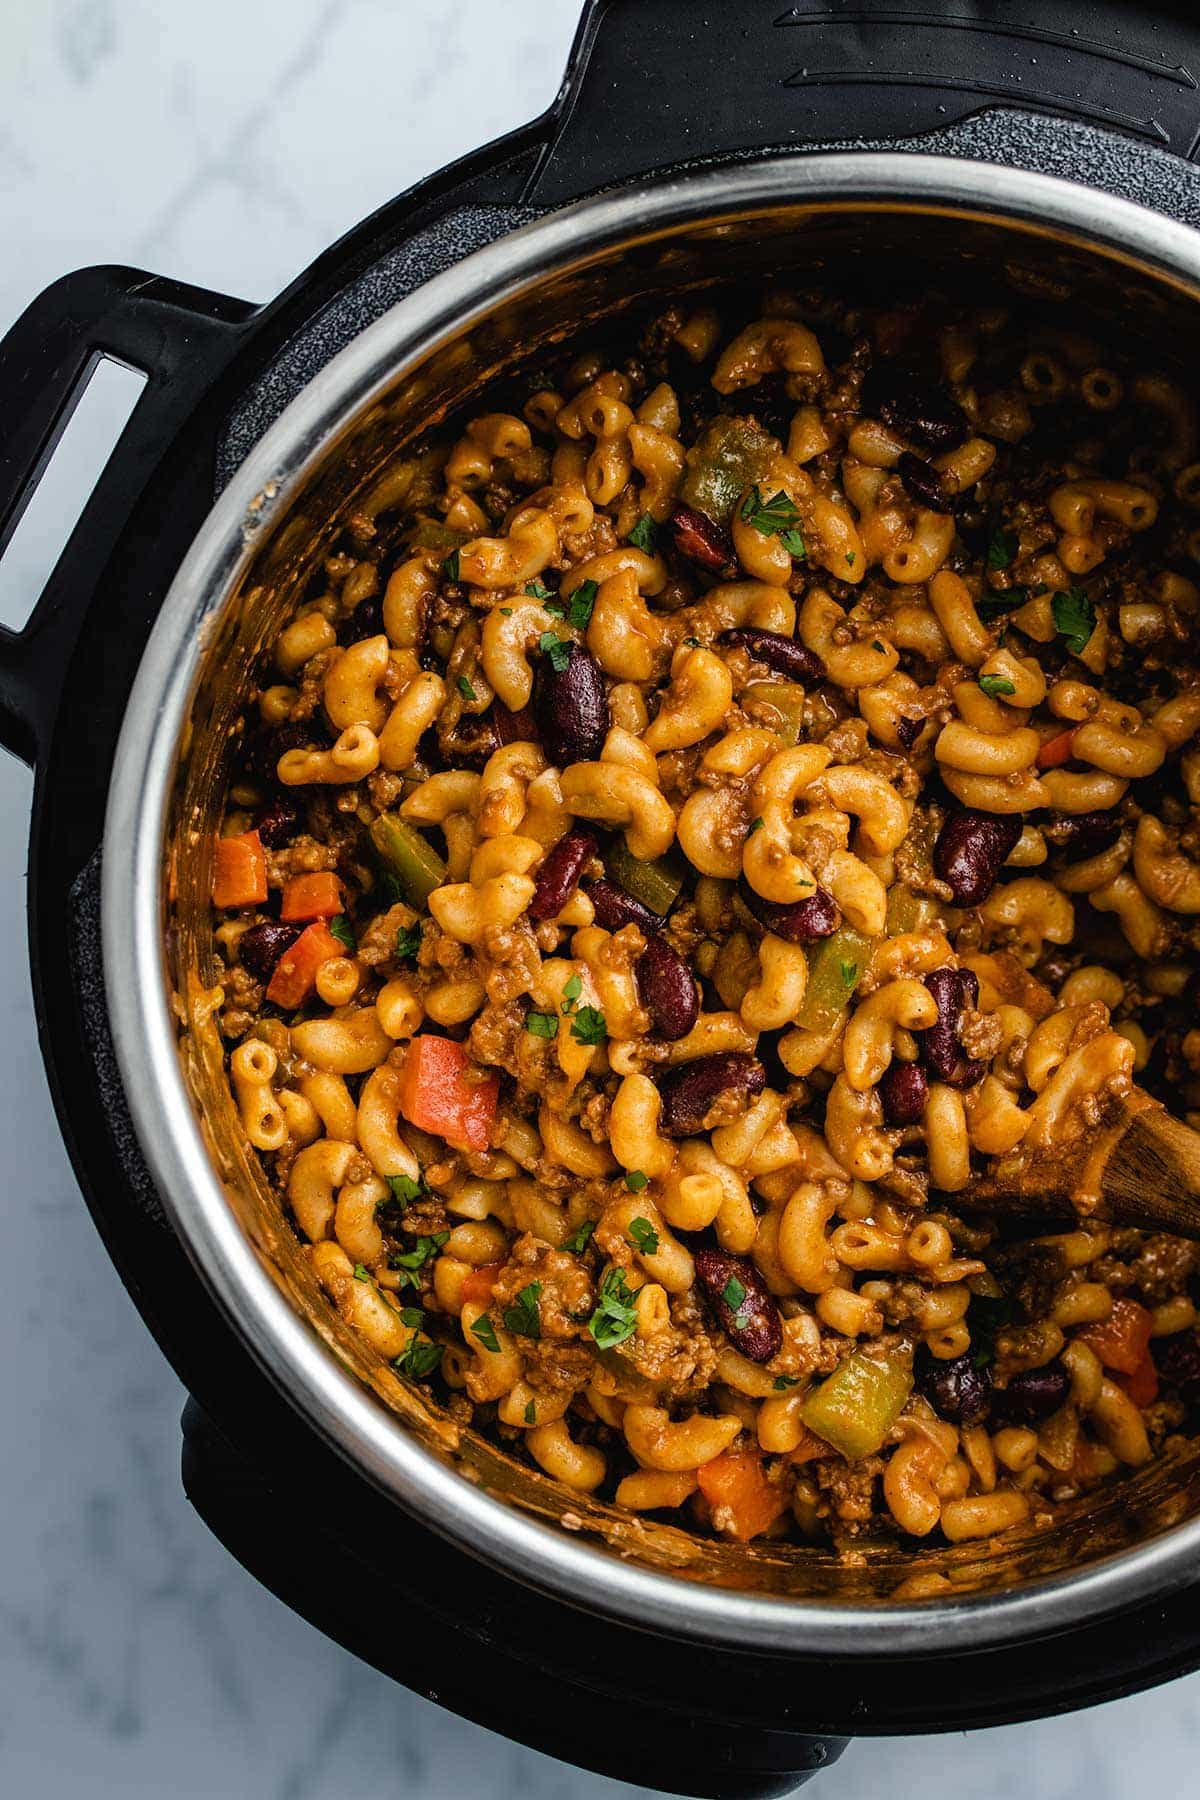 Chili mac and cheese in an Instant Pot viewed from overhead